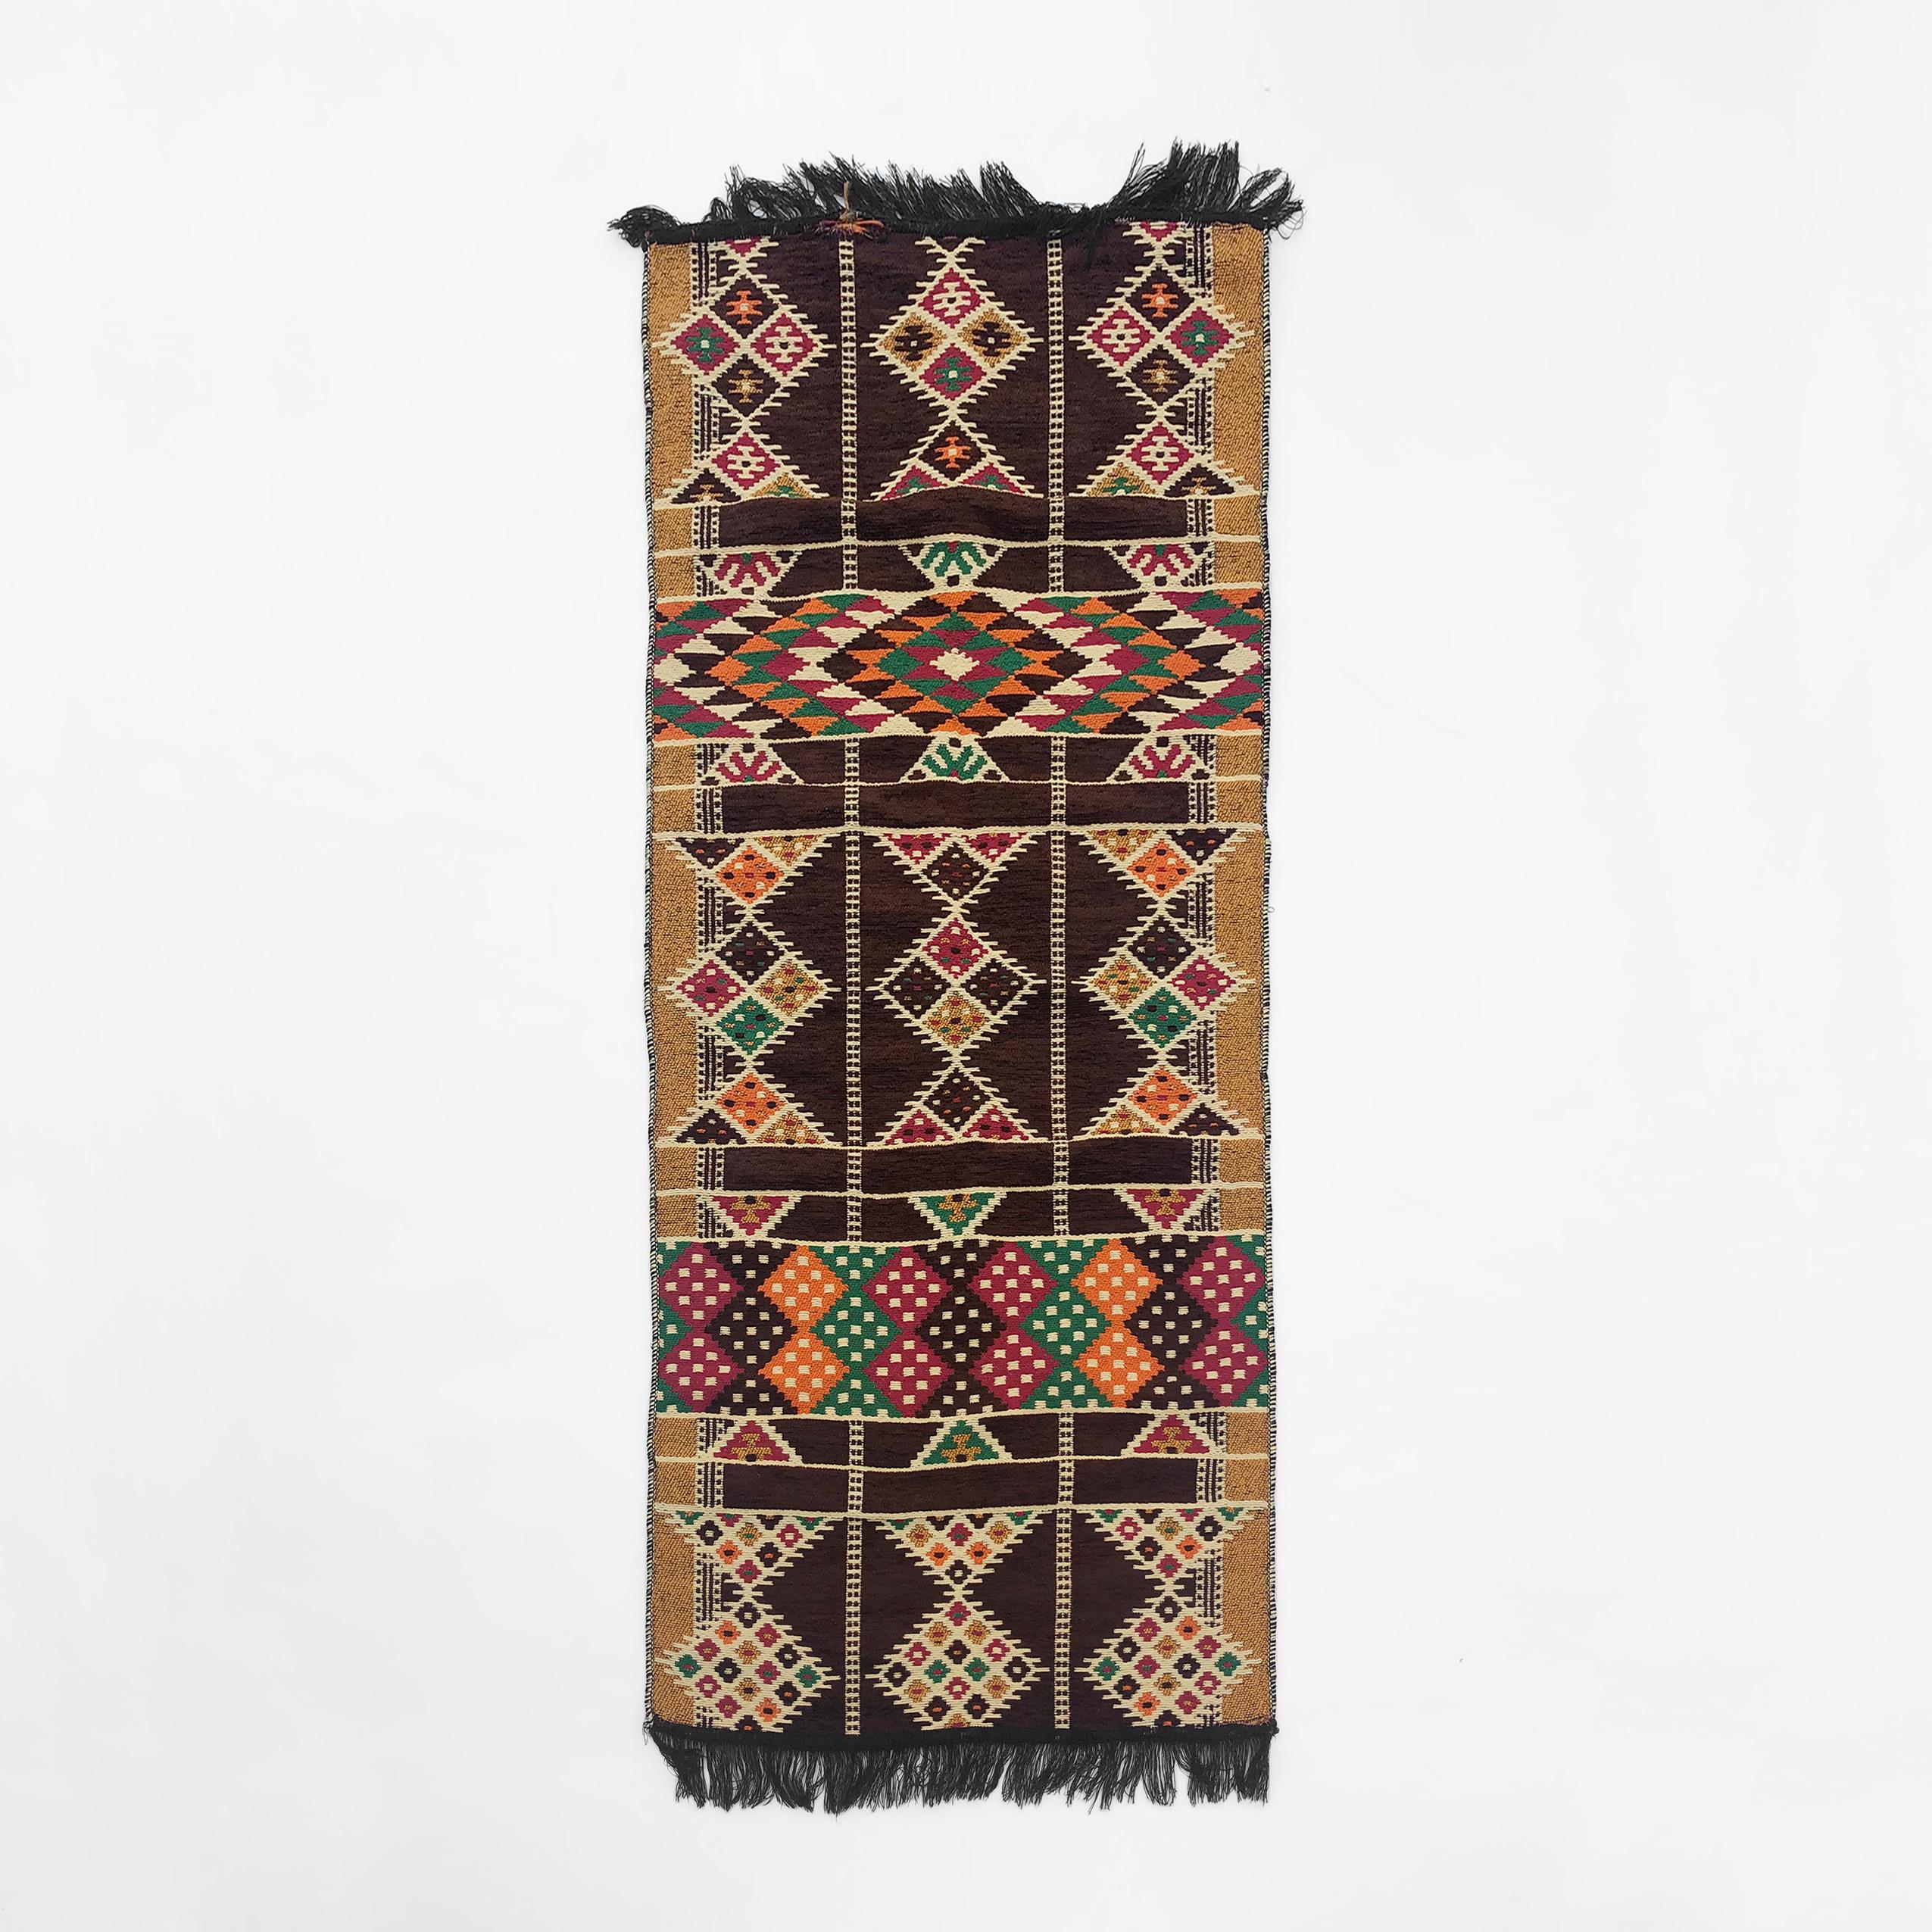 This vintage 1990s cotton mix rug, imported from Egypt, is patterned in an exciting geometric way, with a mix of browns, reds, greens, and yellows. The edges of the rug are fringed, and the runner material soft and comforting to the touch. 

These